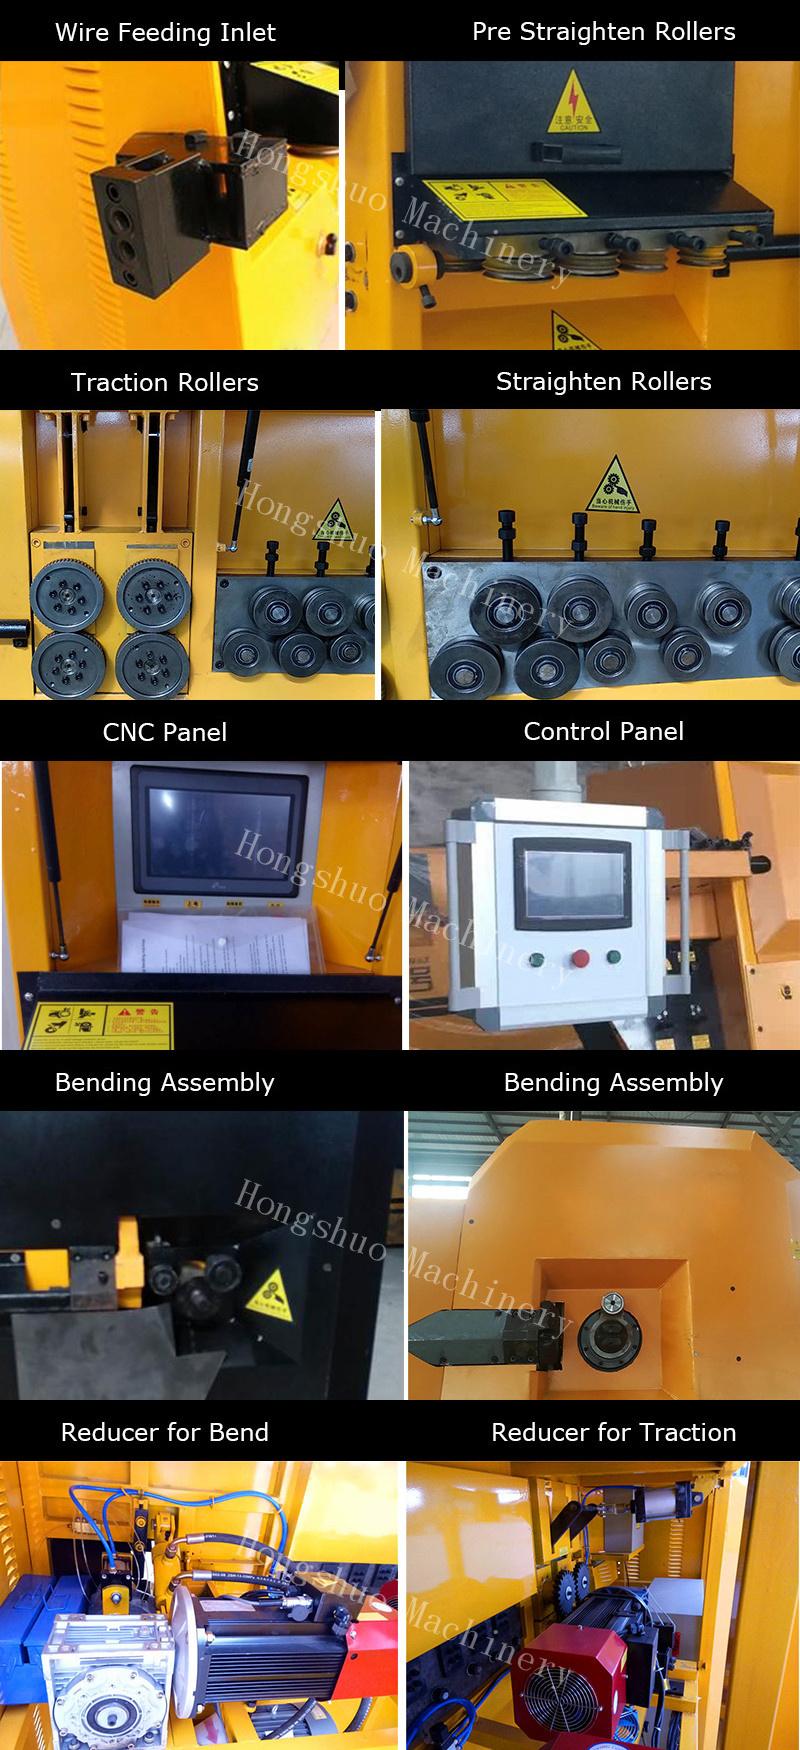 Top Quality Chinese Supplier Trustworthy Business Partner Multi-Language Cnvtwo-Way Hydraulic Bending Machine